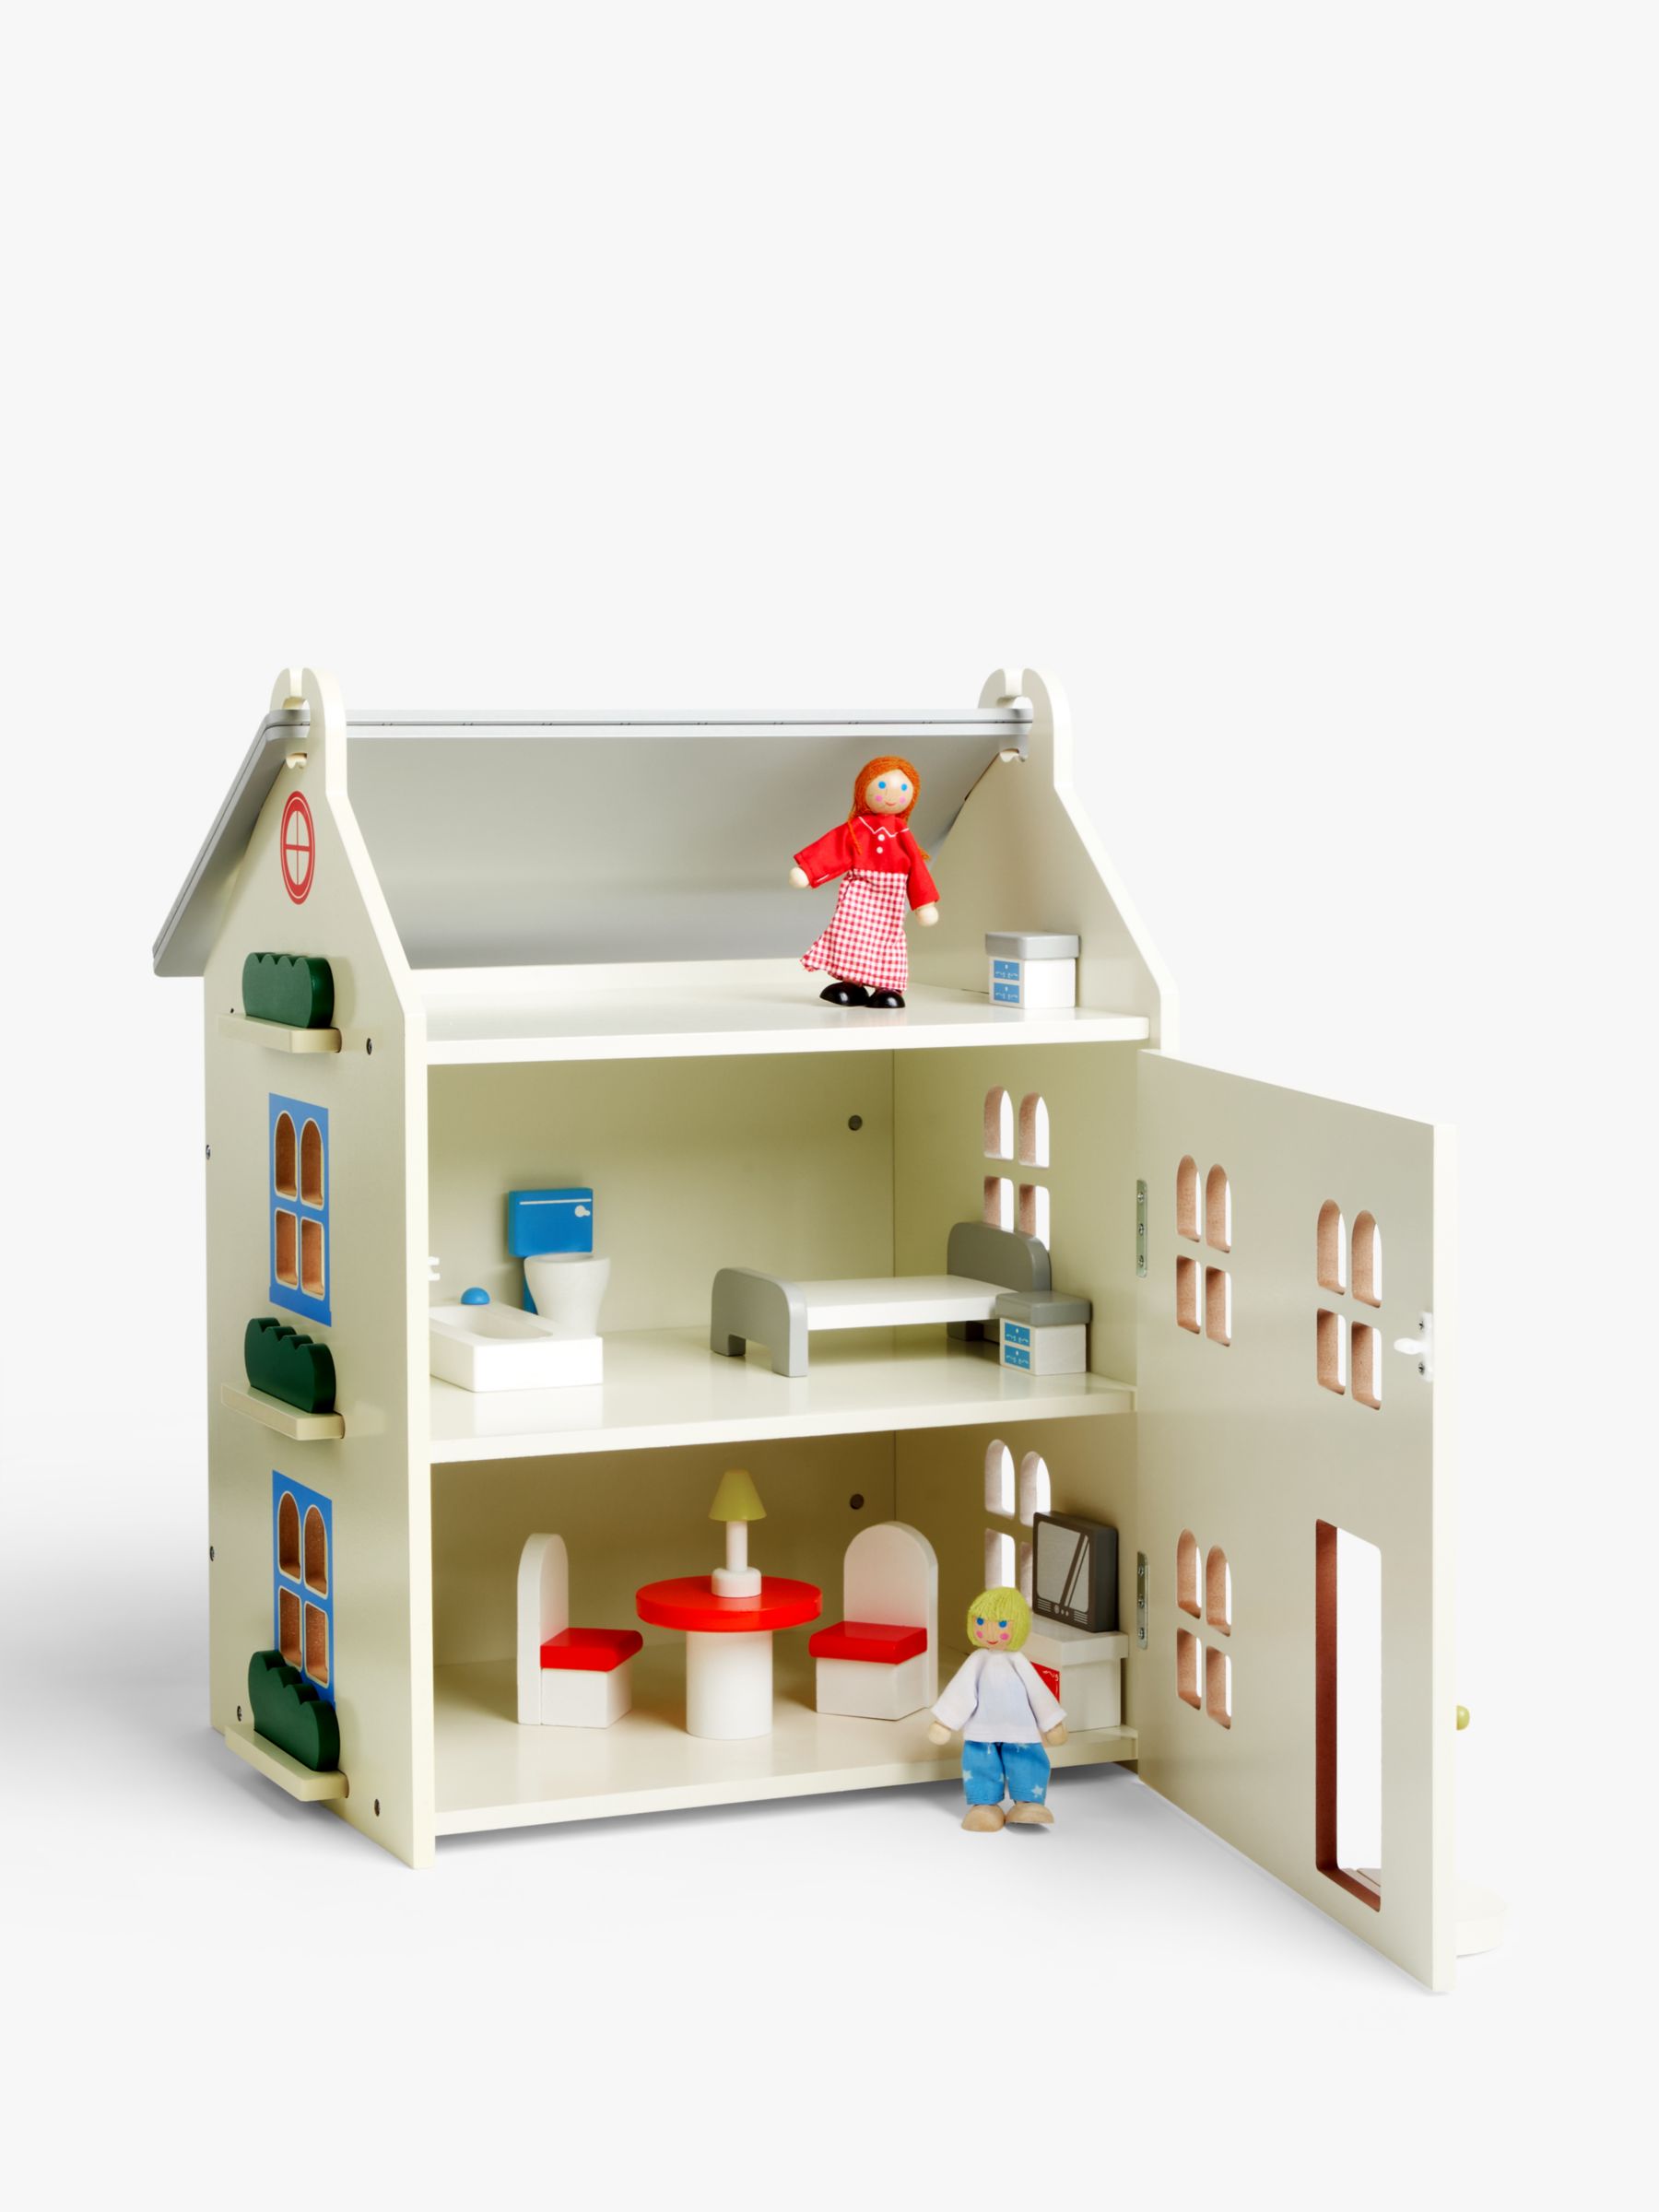 wooden doll's house